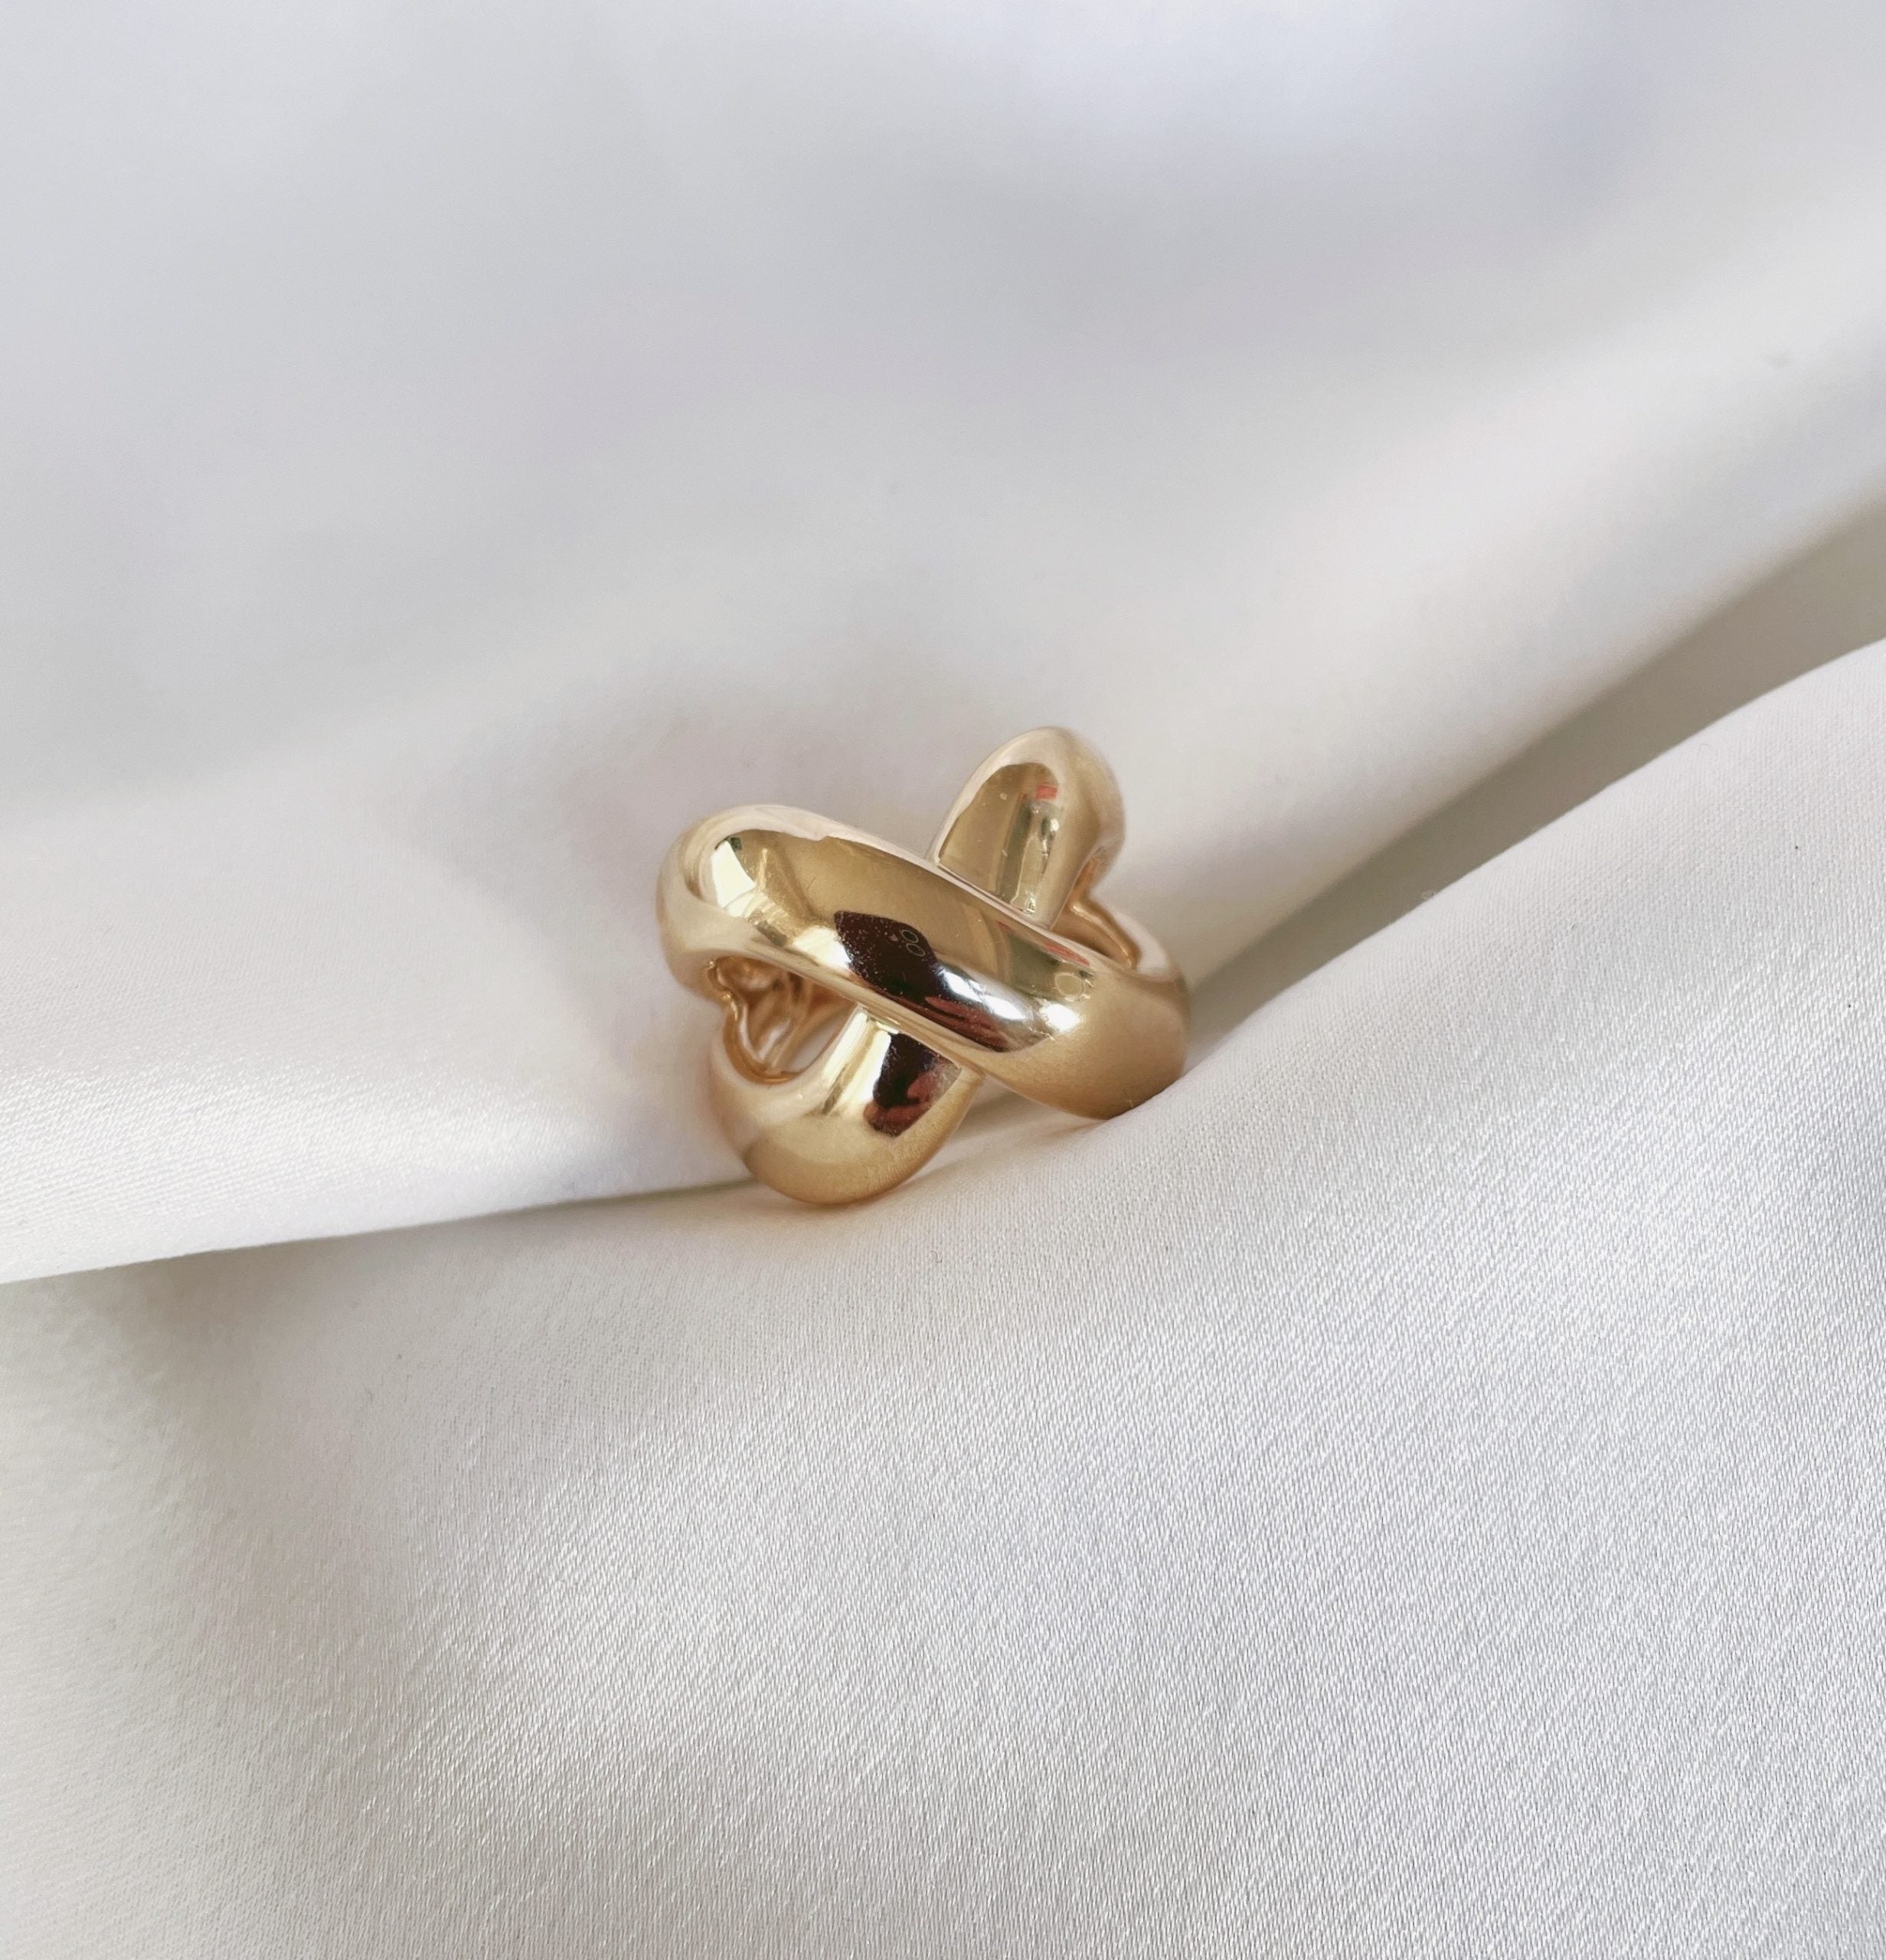 Gold-plated “Link” ring